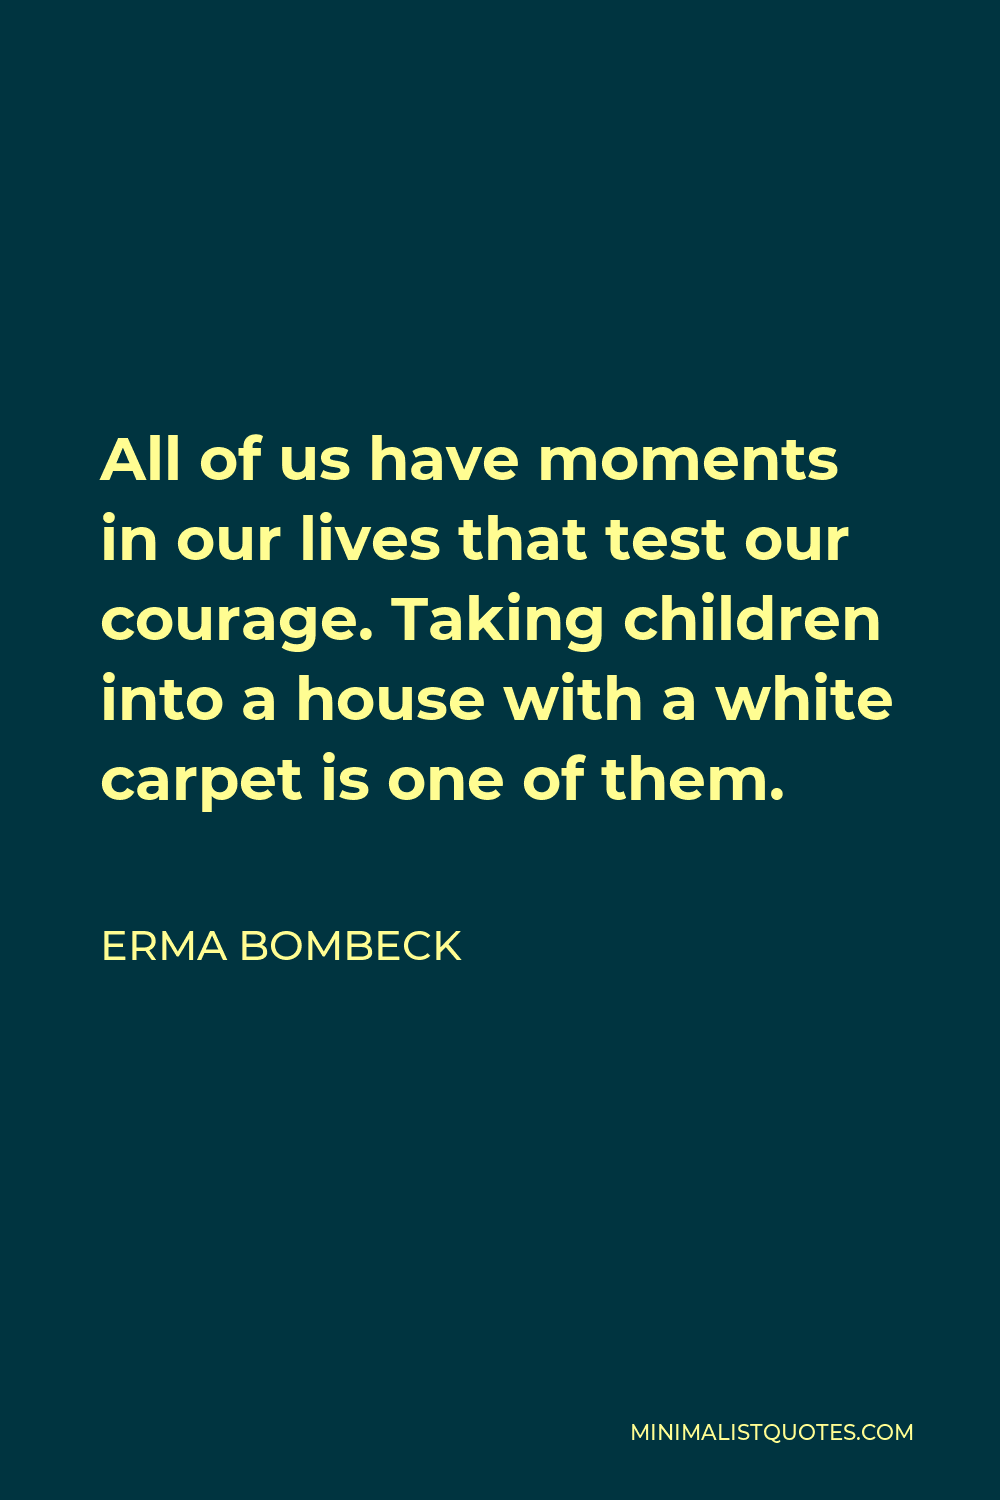 Erma Bombeck Quote - All of us have moments in our lives that test our courage. Taking children into a house with a white carpet is one of them.